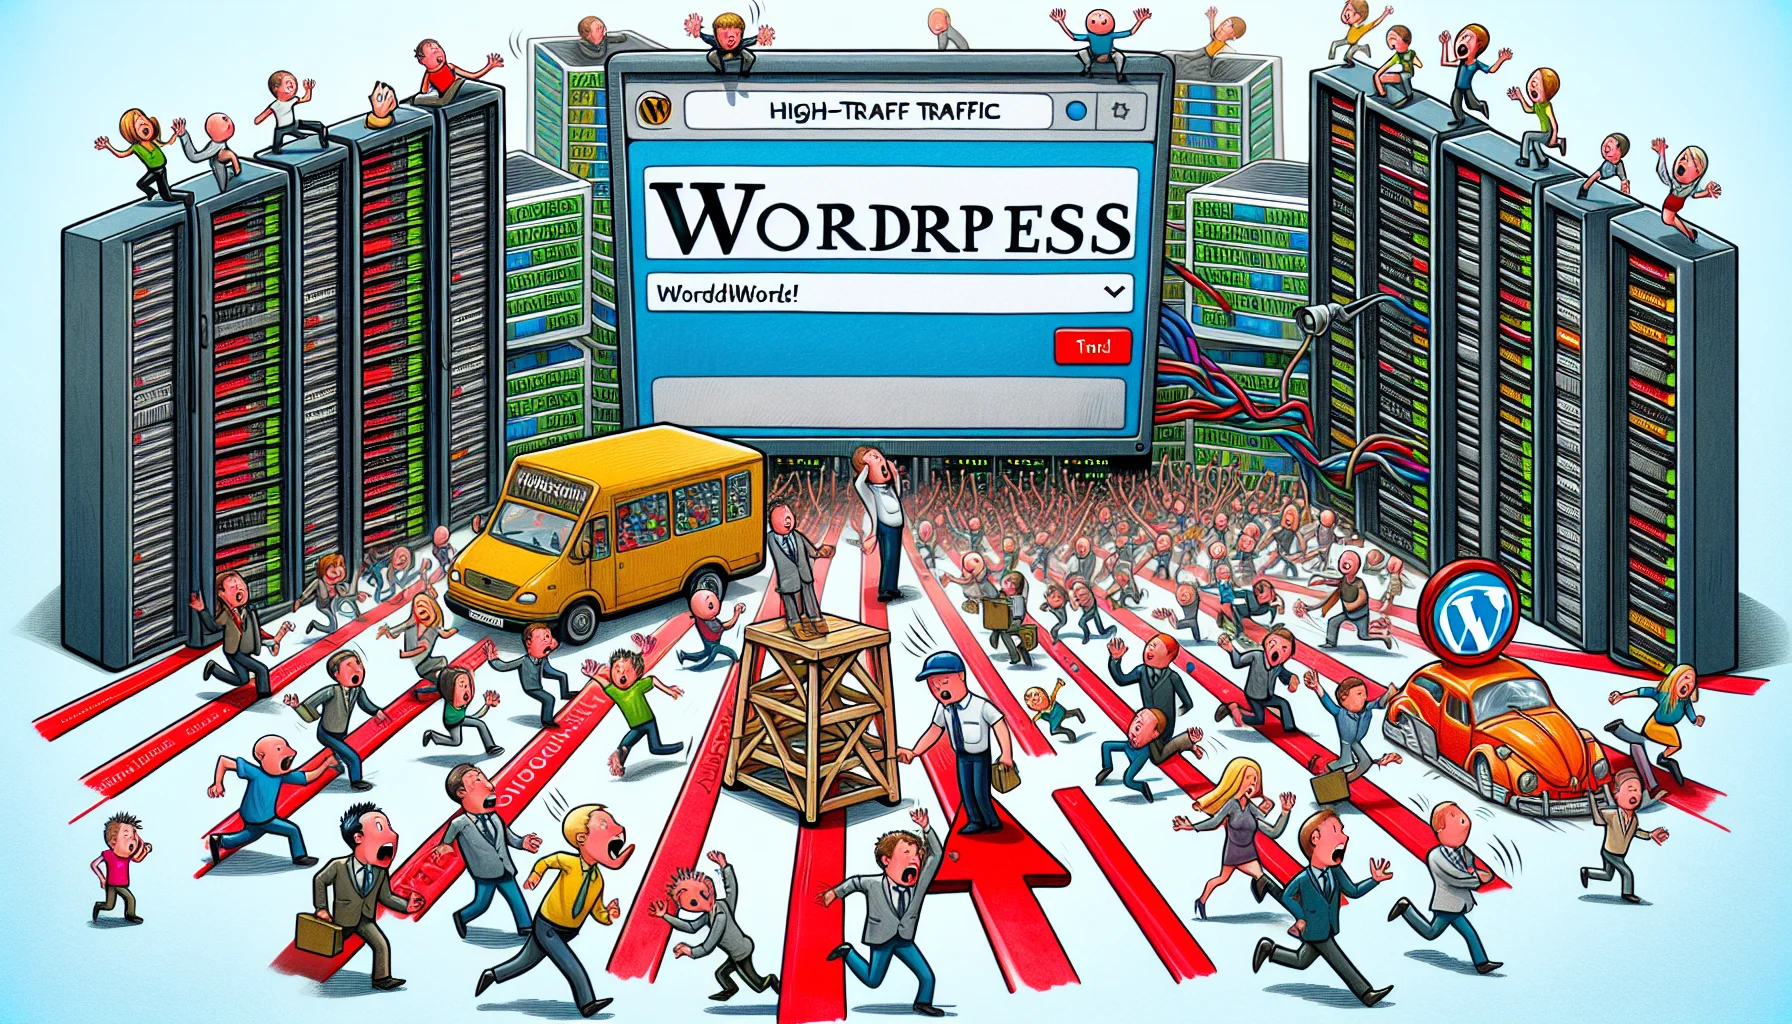 Imagine an amusing scenario showcasing high-traffic WordPress hosting. There is perhaps a cartoon-style depiction of a server room, with visible website tabs humorously labelled 'WordPress'. Convey the chaos of high traffic in a friendly manner. Perhaps there are tiny illustrated people representing users excitedly running through the image, with different genders and descents such as Caucasian, Hispanic and Middle-Eastern, adding unique elements into this digital landscape. One person might be trying to direct this wild traffic with a big semaphore, symbolising efficient web hosting. Make sure this picture is colourful, lively and fun, enticing one to host their site here.